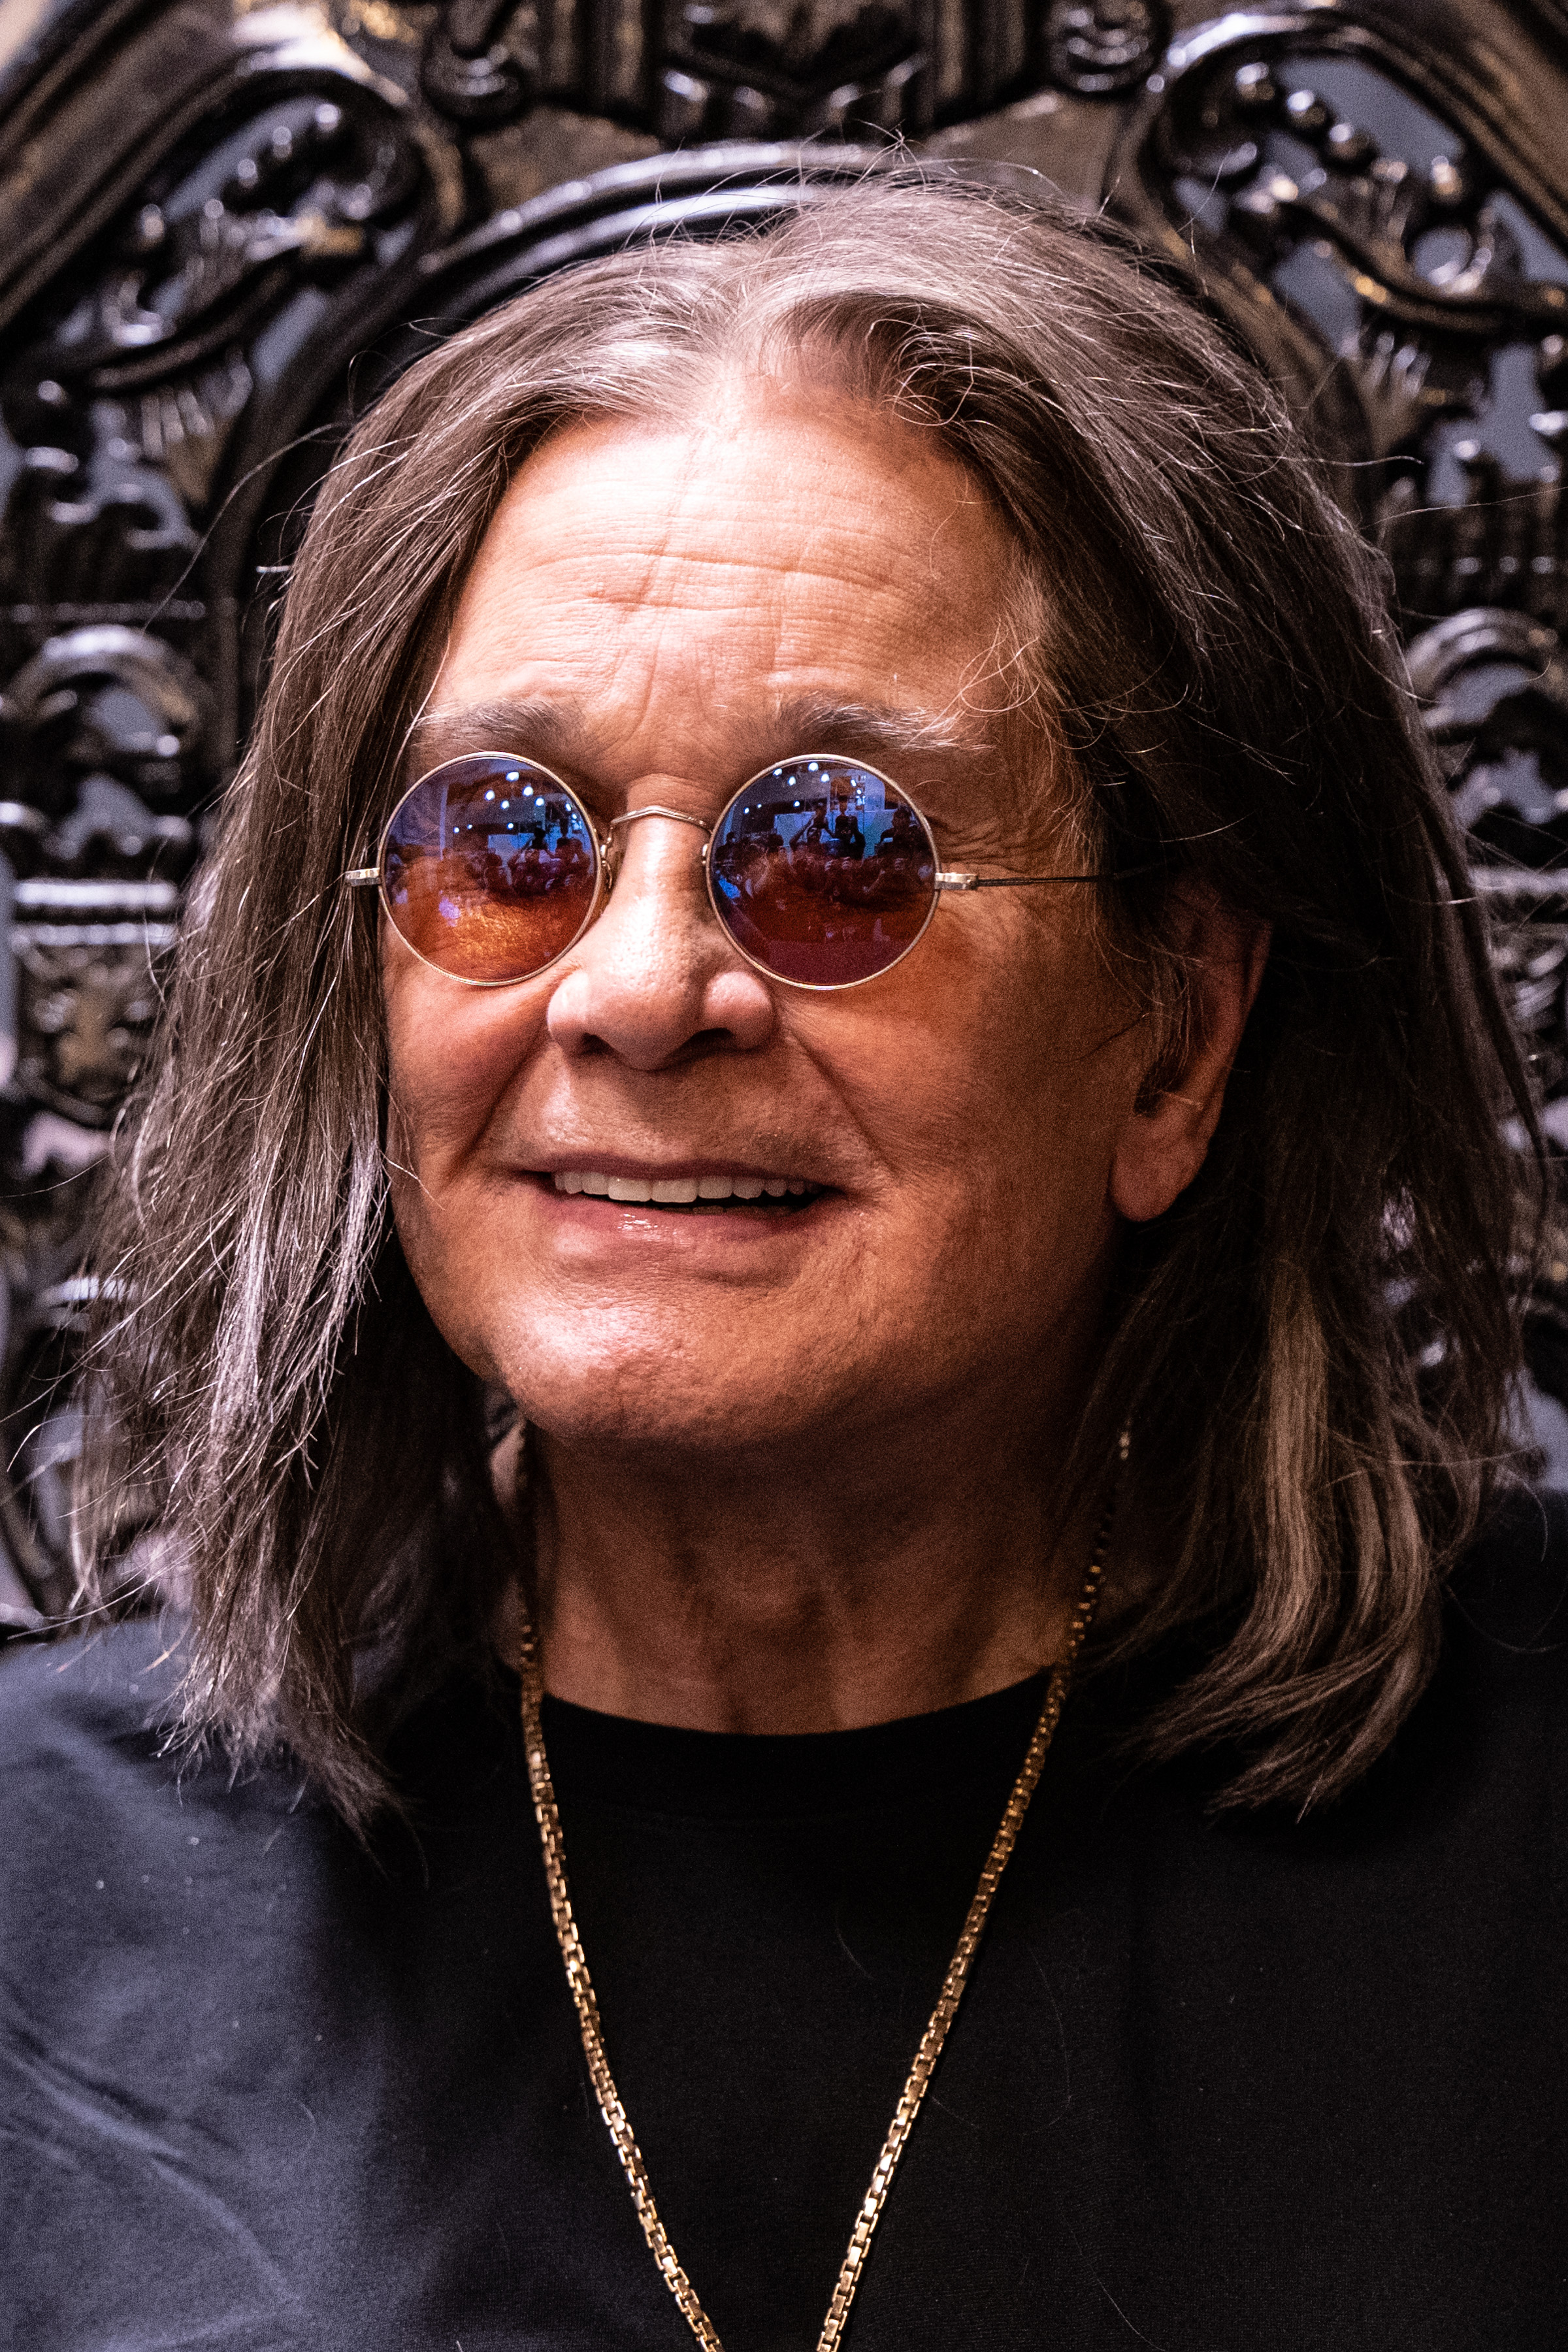 Ozzy Osbourne at his "Patient Number 9" album signing in Long Beach, 2022 | Source: Getty Images